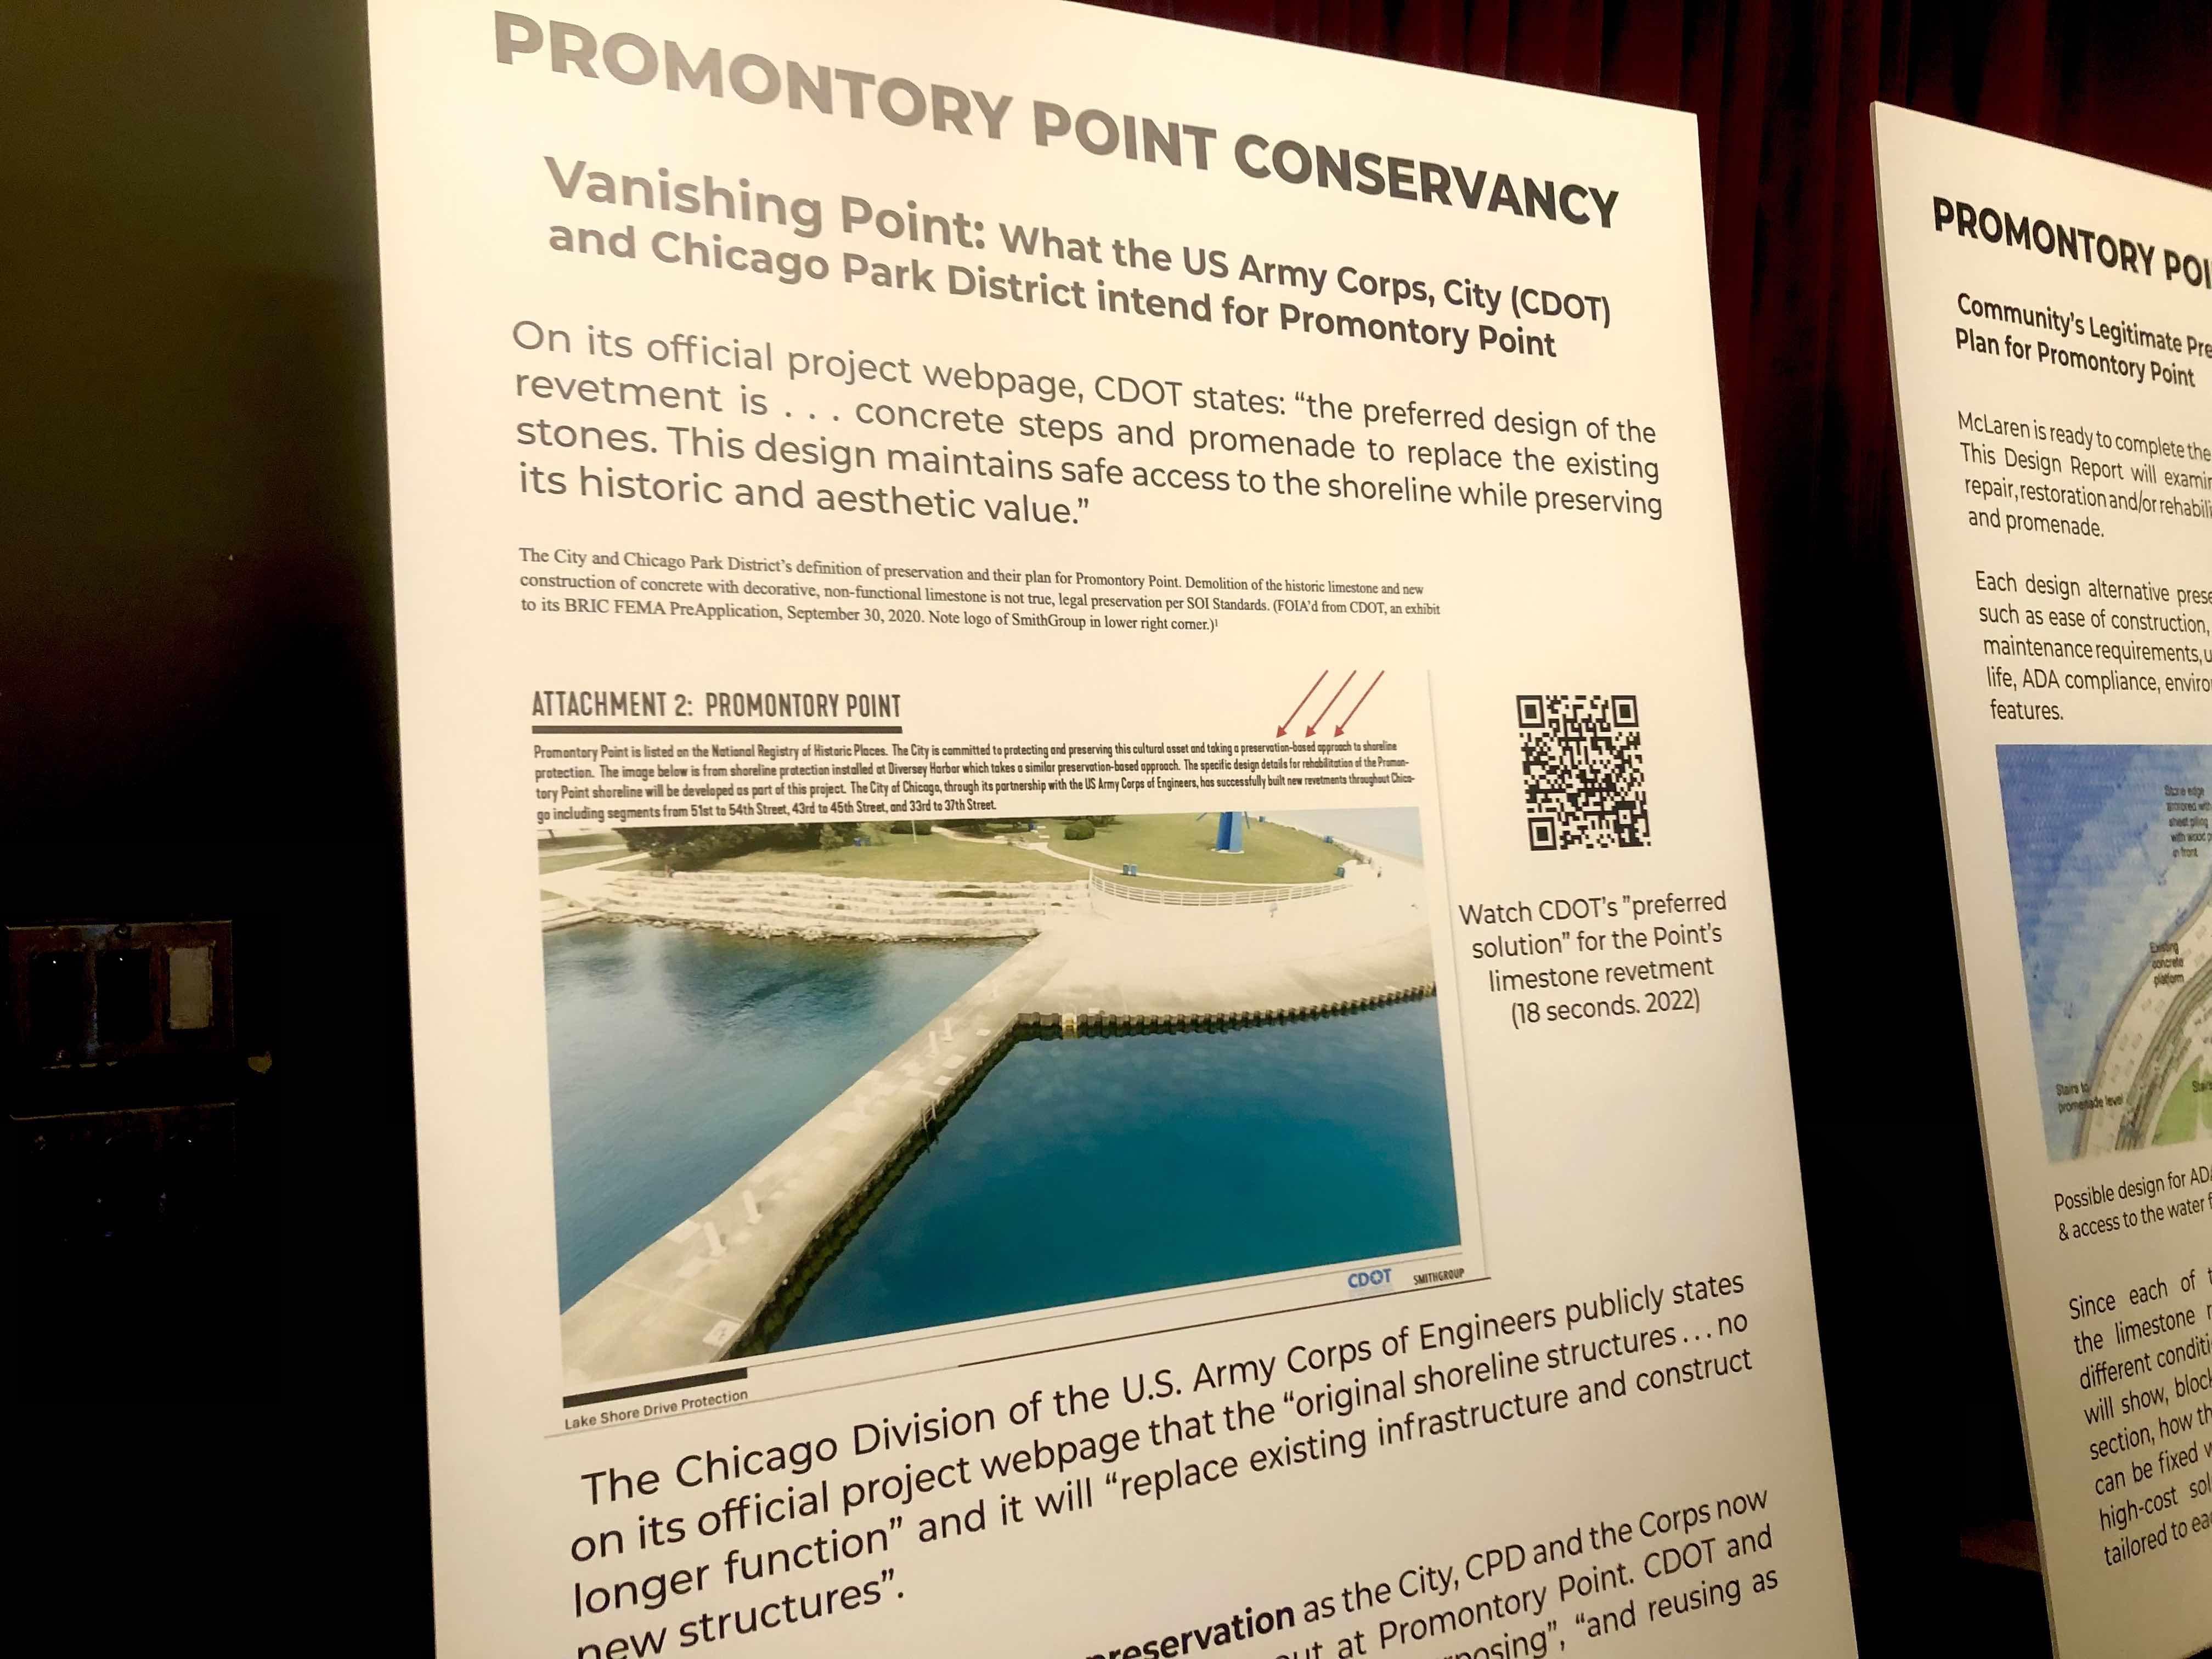 A photo shared by Promontory Point Conservancy as CDOT’s plan for the Point is actually an image of Diversey Harbor, CDOT told WTTW News. “The concrete in the photo is not relevant to what is currently being considered for Promontory Point, as it is not the intent of the City to construct a concrete revetment at the Point,” said a CDOT spokesperson. (Patty Wetli / WTTW News)